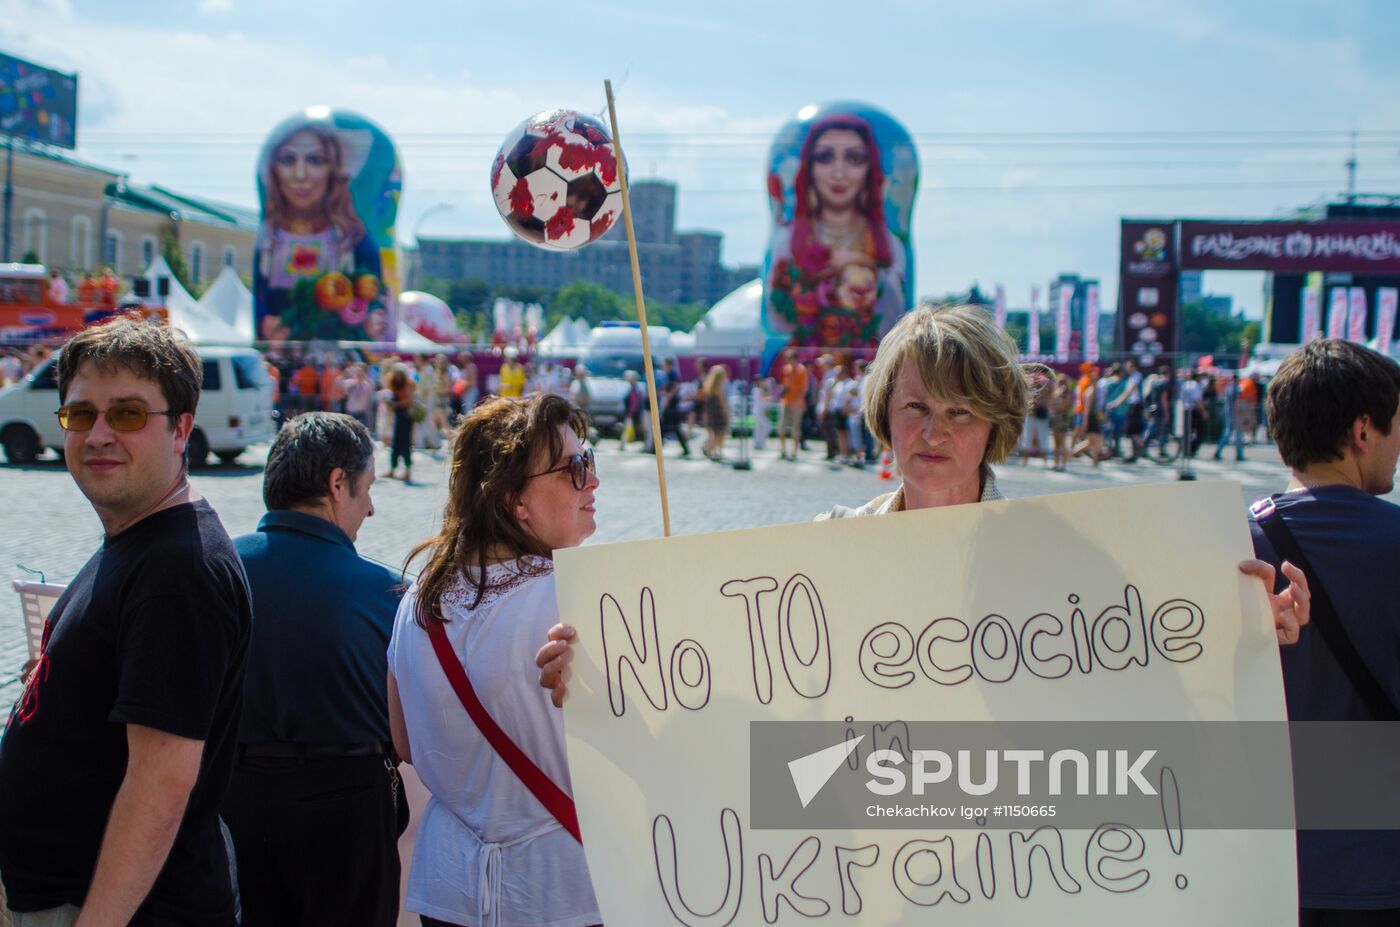 Animal defenders hold rally in Euro 2012 fan area